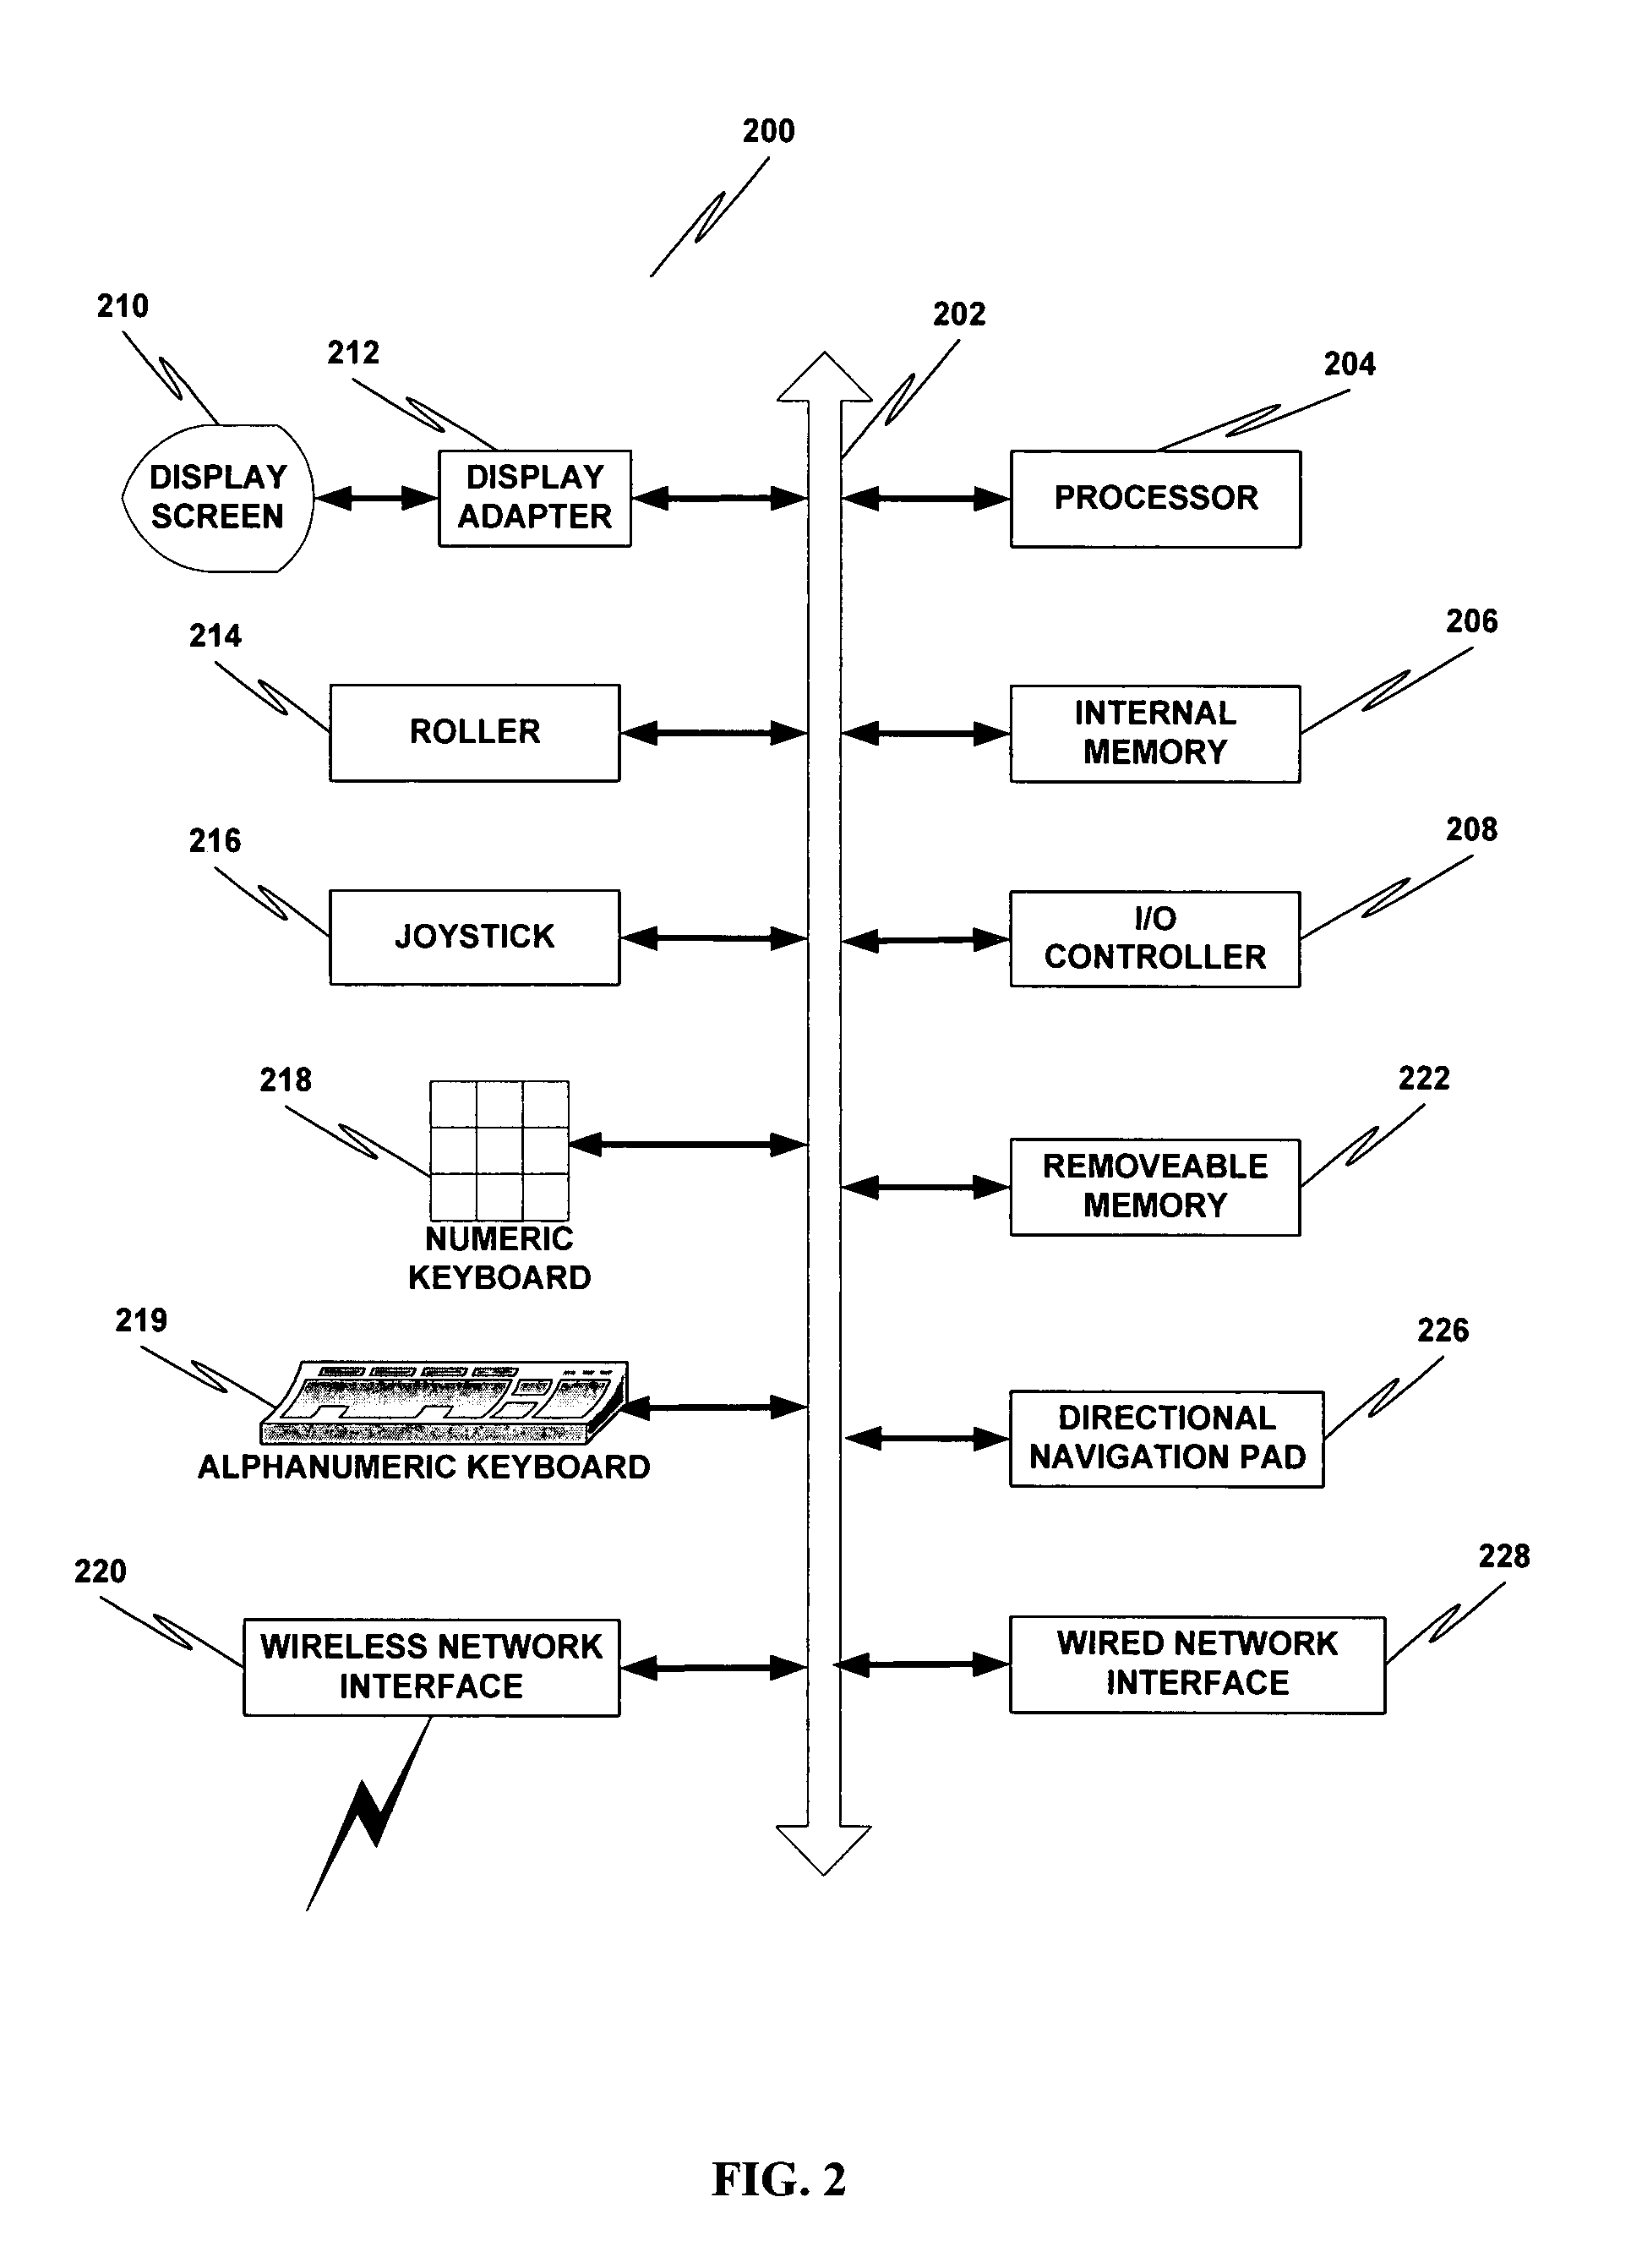 Interleaved data and instruction streams for application program obfuscation